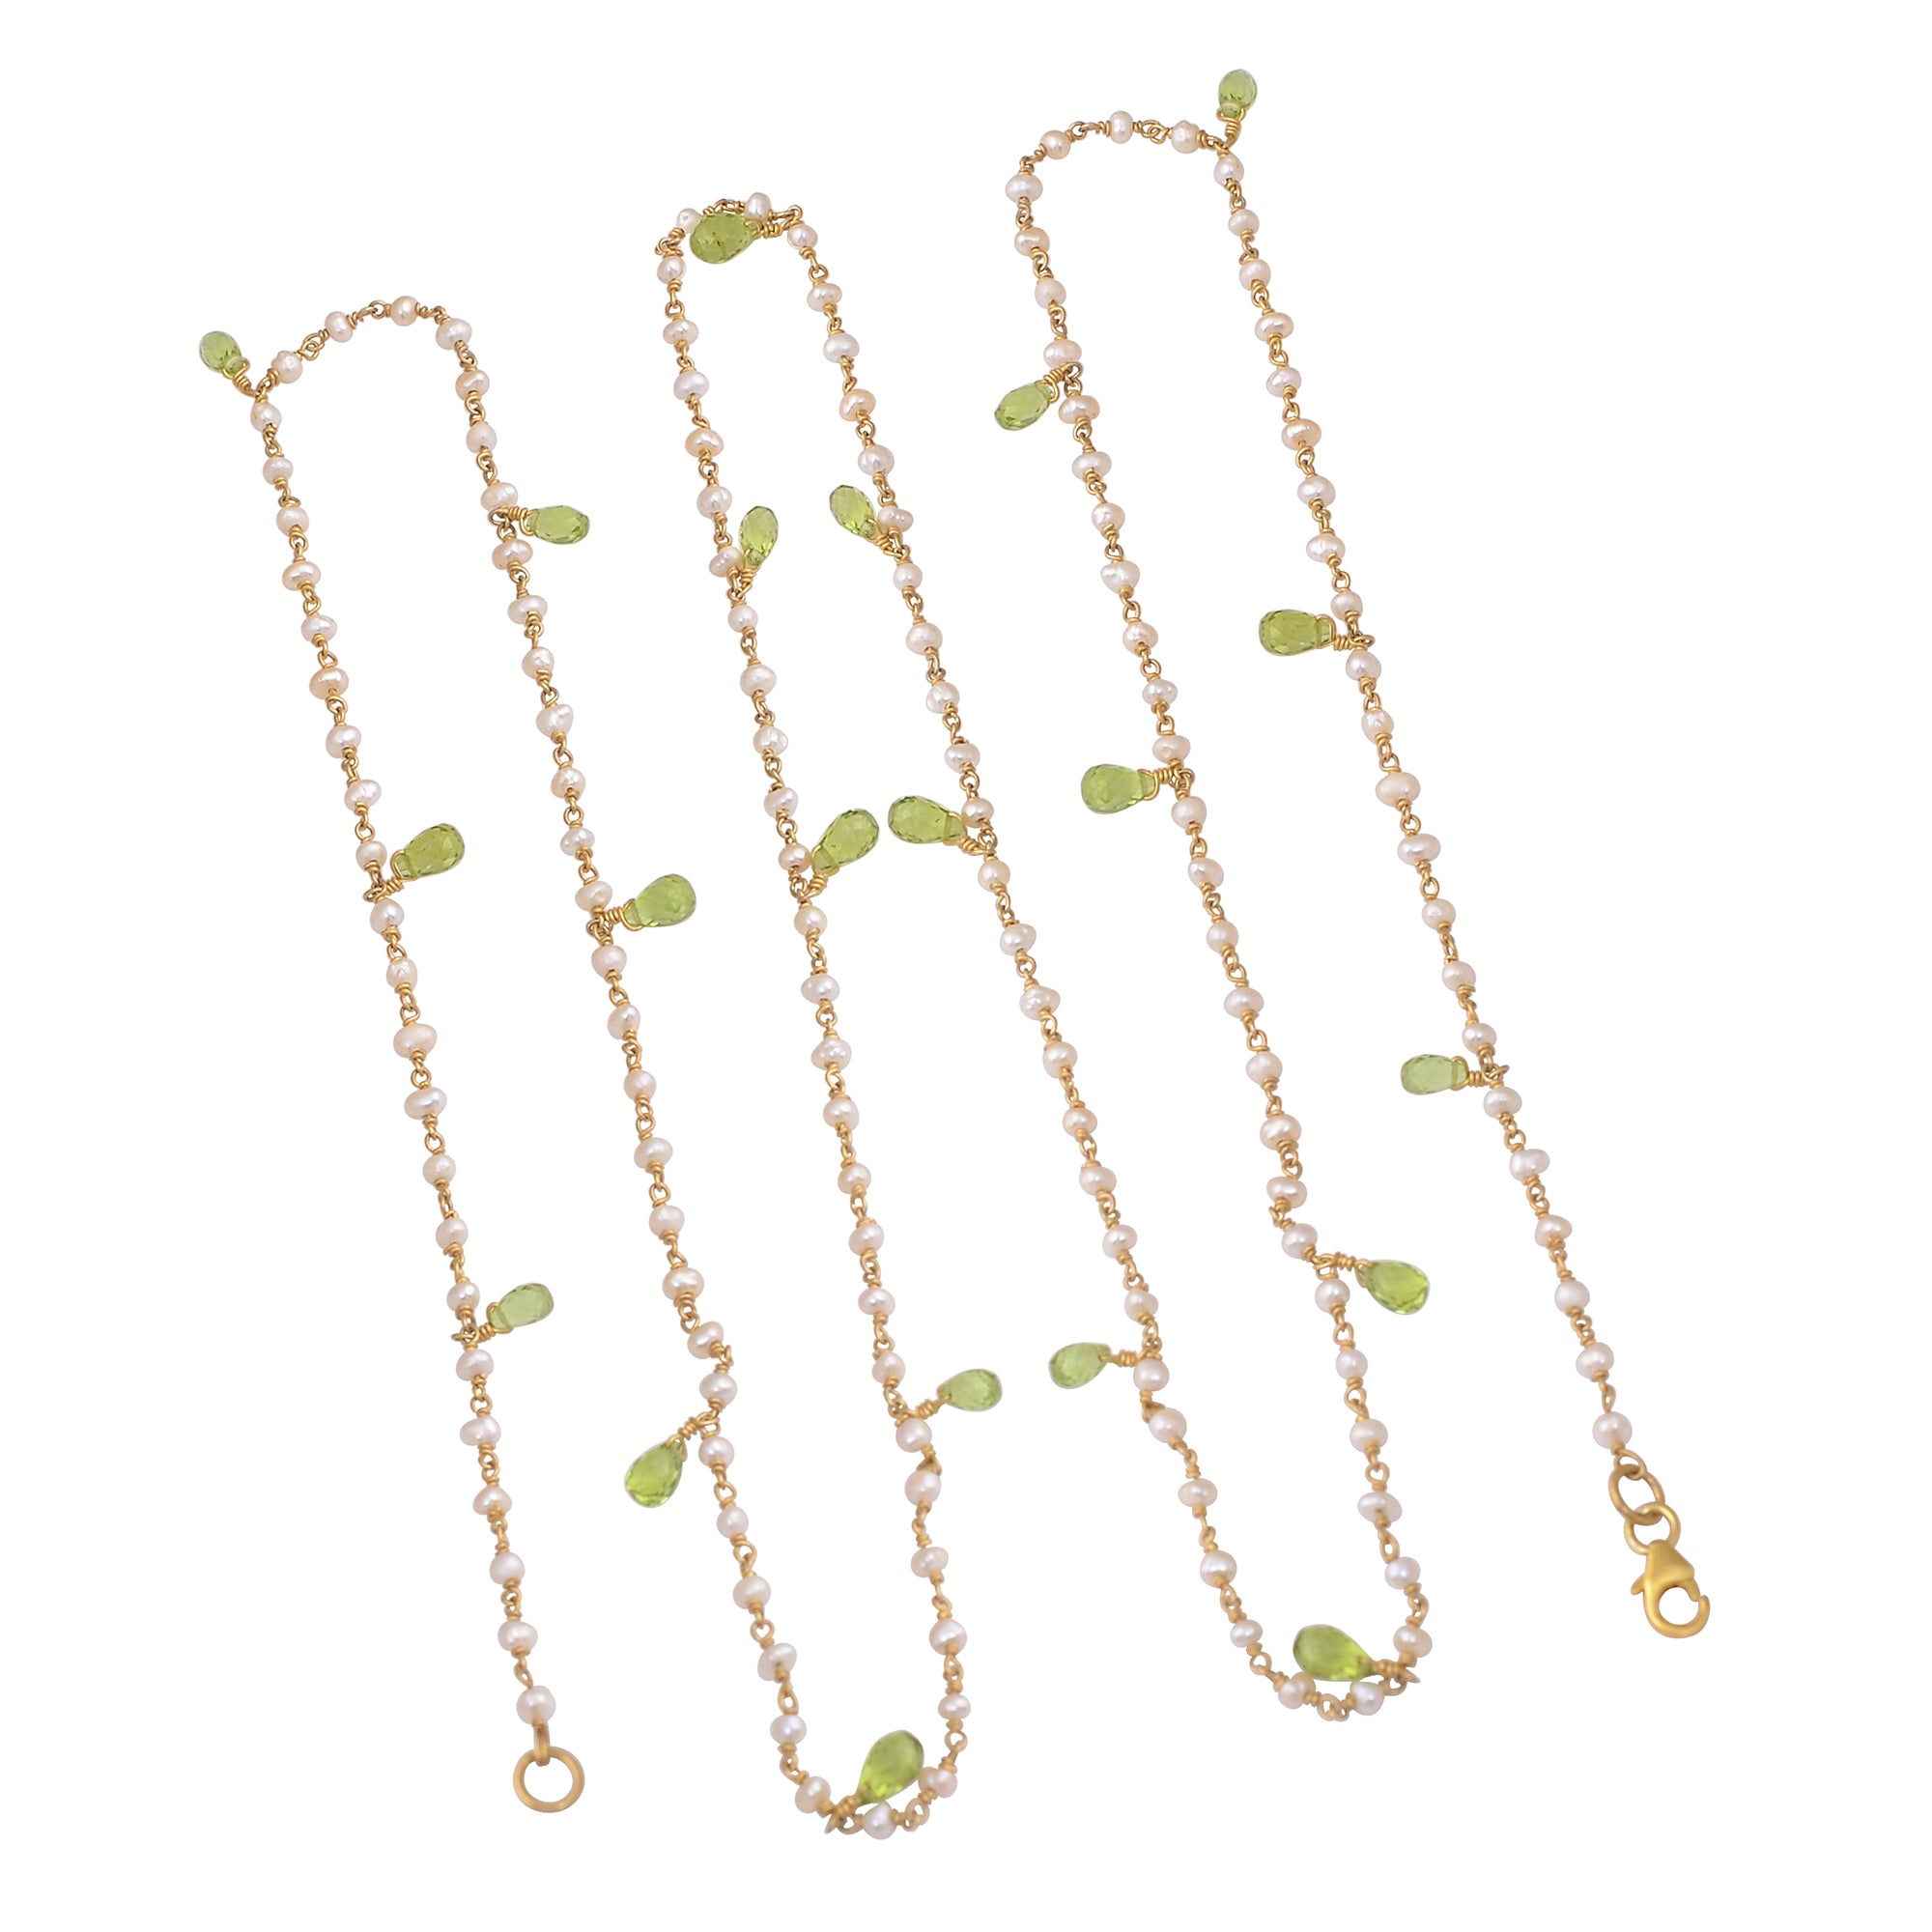 Buy Handcrafted Silver Gold Plated Peridot Drop/pearl Aanti Necklace